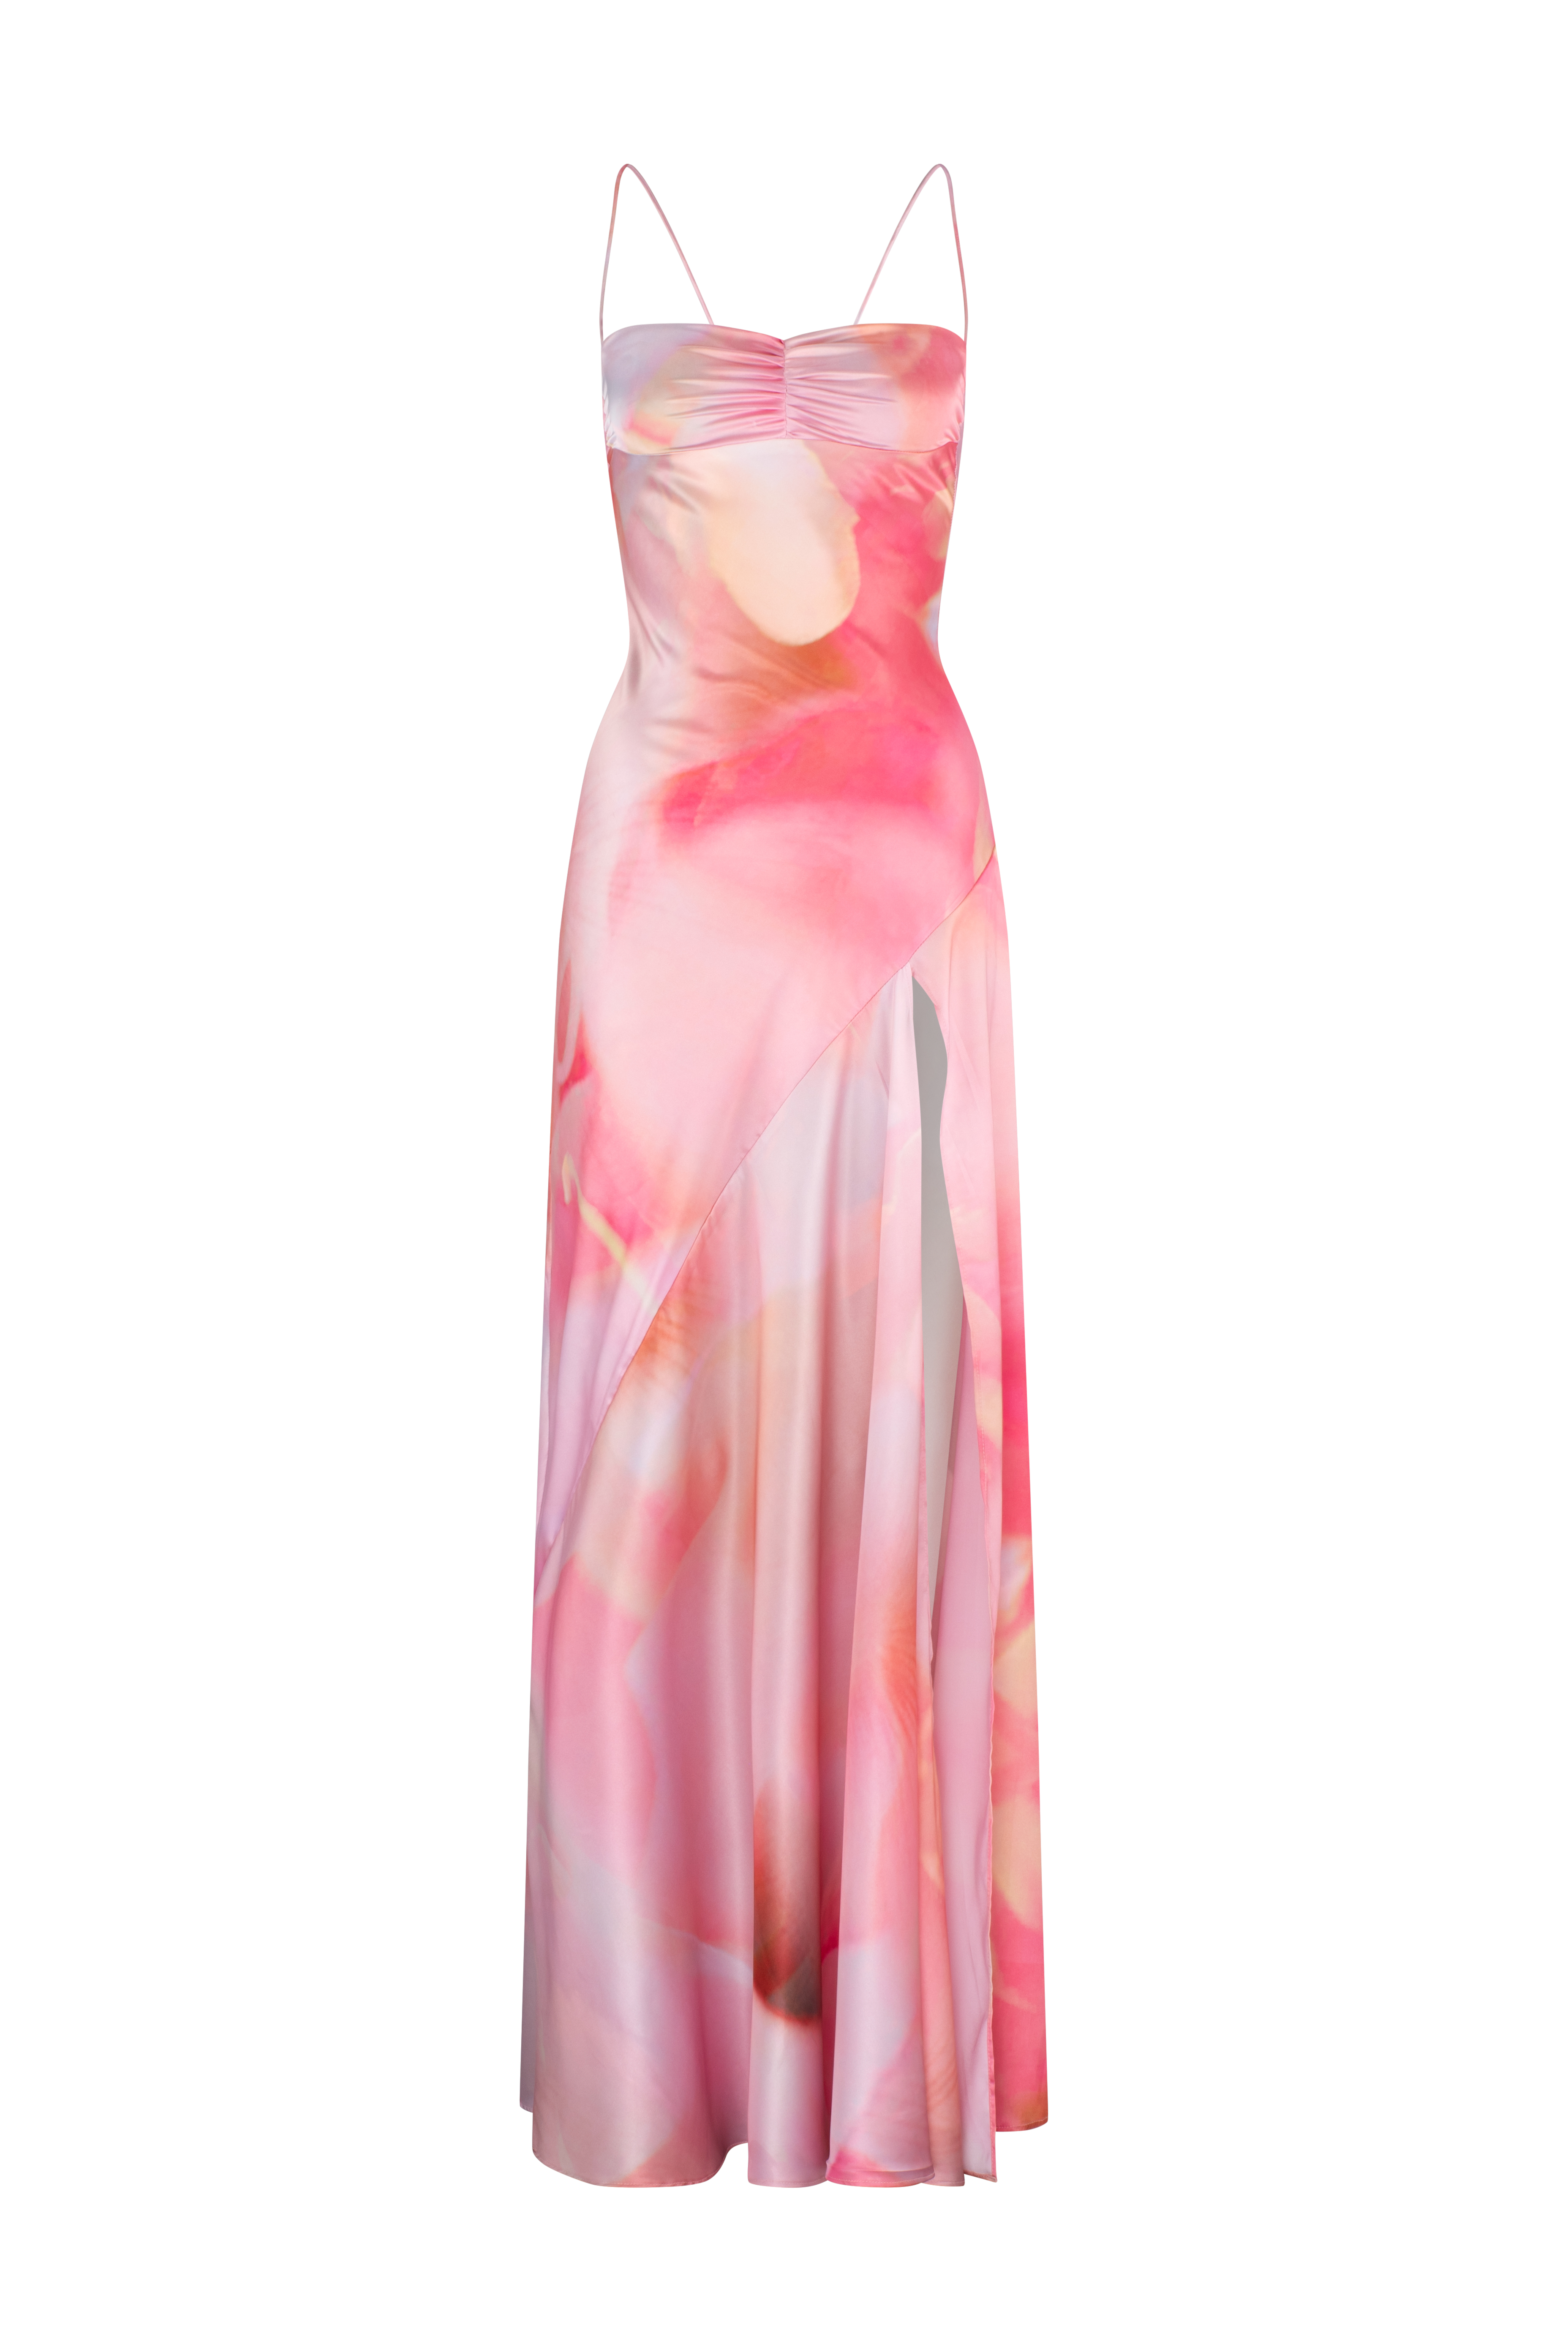 GAIA GOWN: LILLE LIMITED EDITION